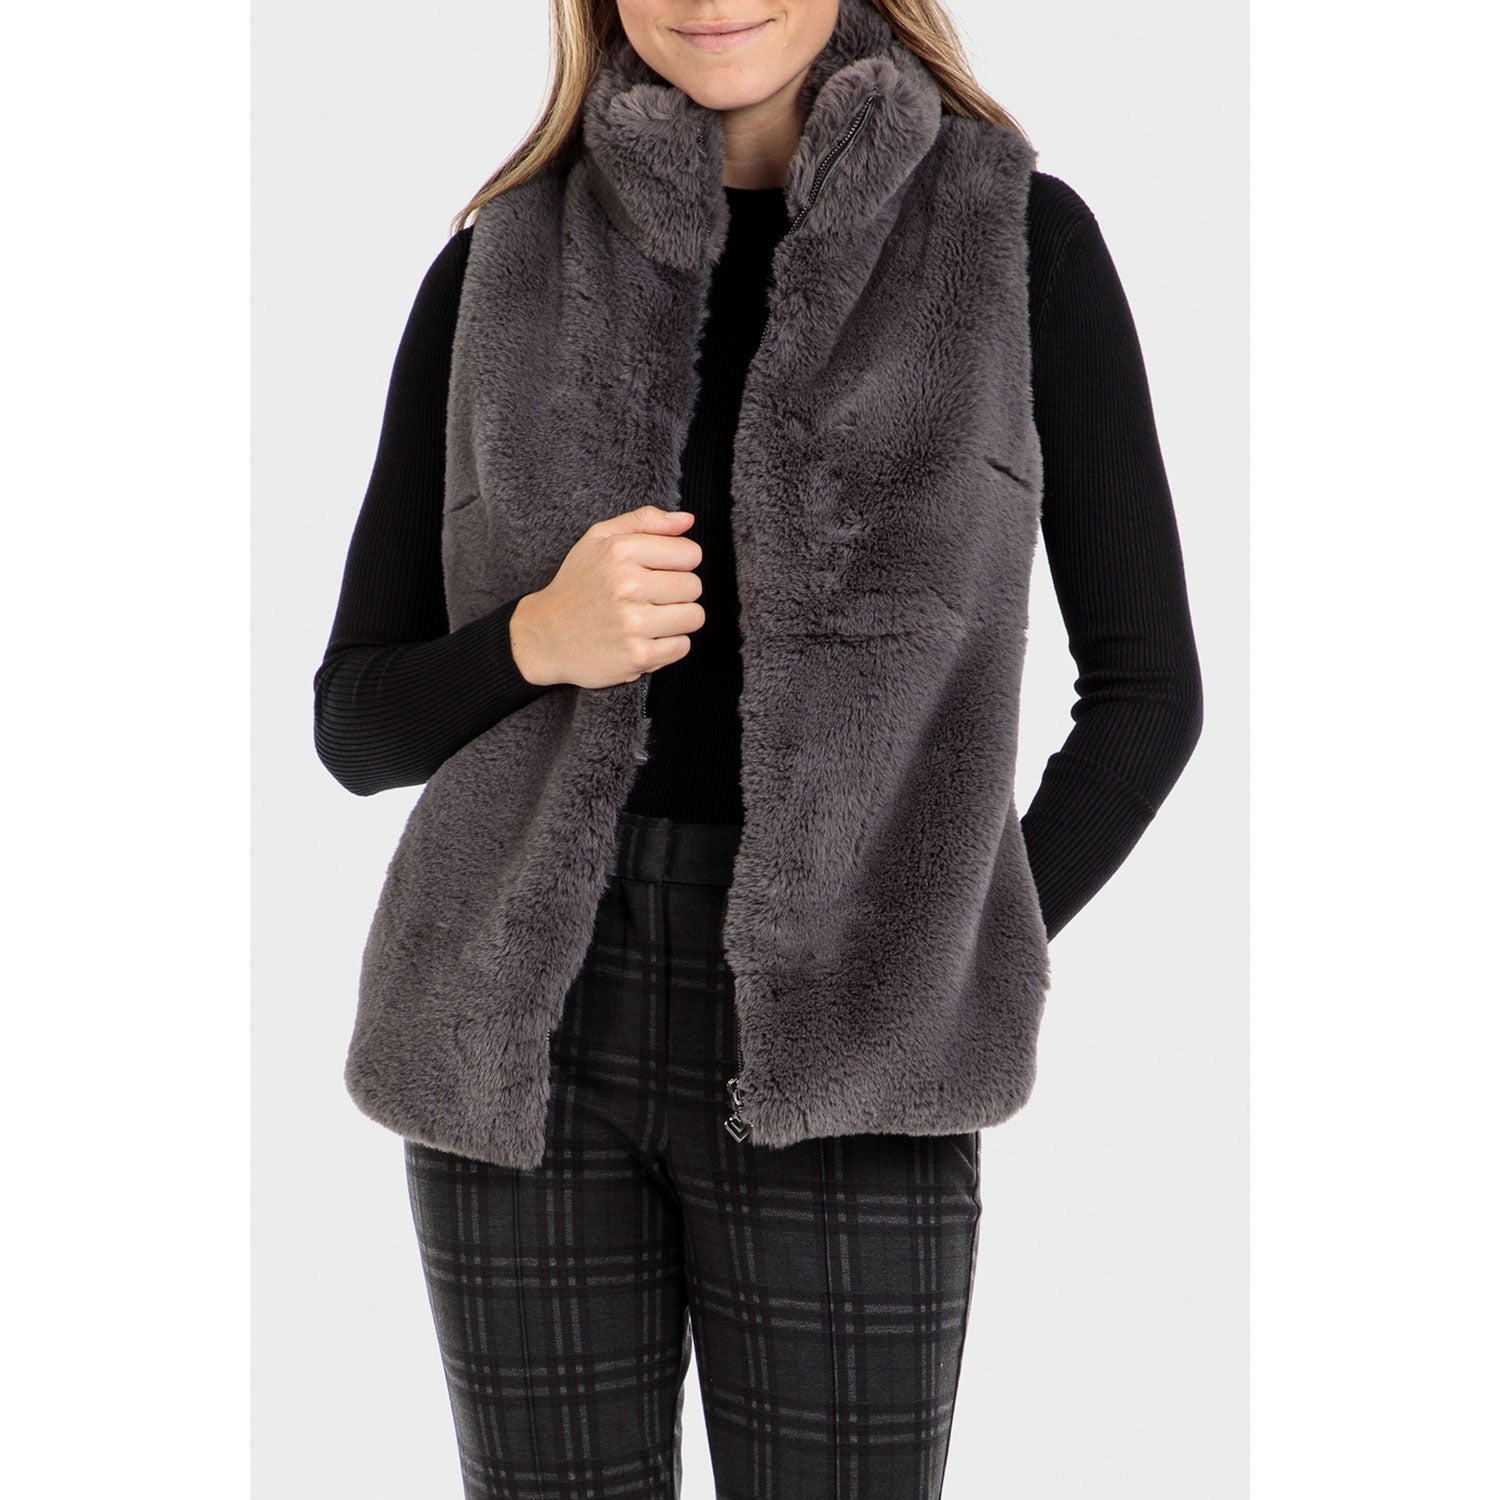 Punt Roma Waistcoat With Faux Fur - Grey 1 Shaws Department Stores